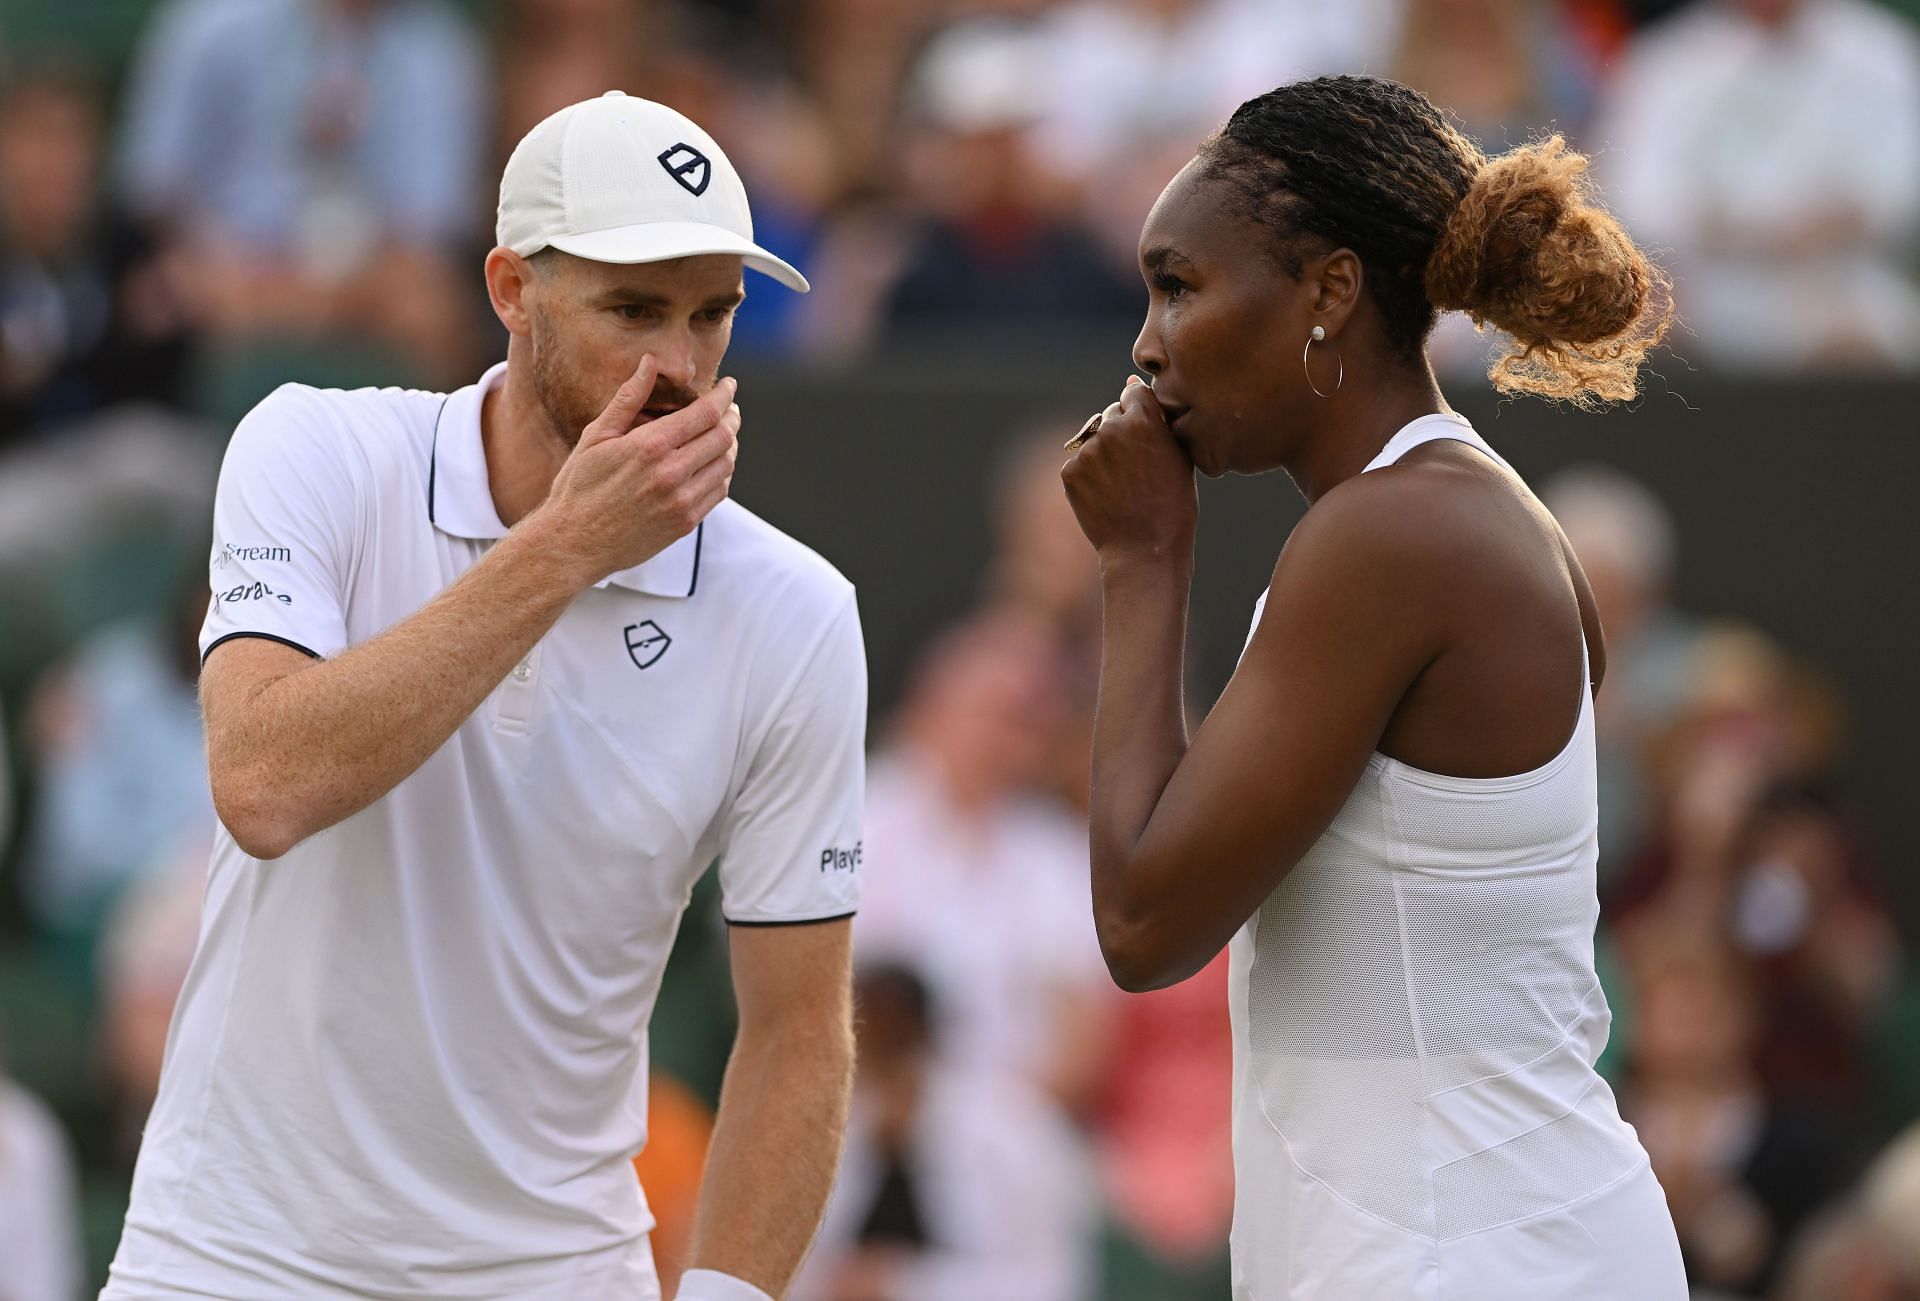 Venus Williams partnered Jamie Murray in the mixed doubles tournament at Wimbledon